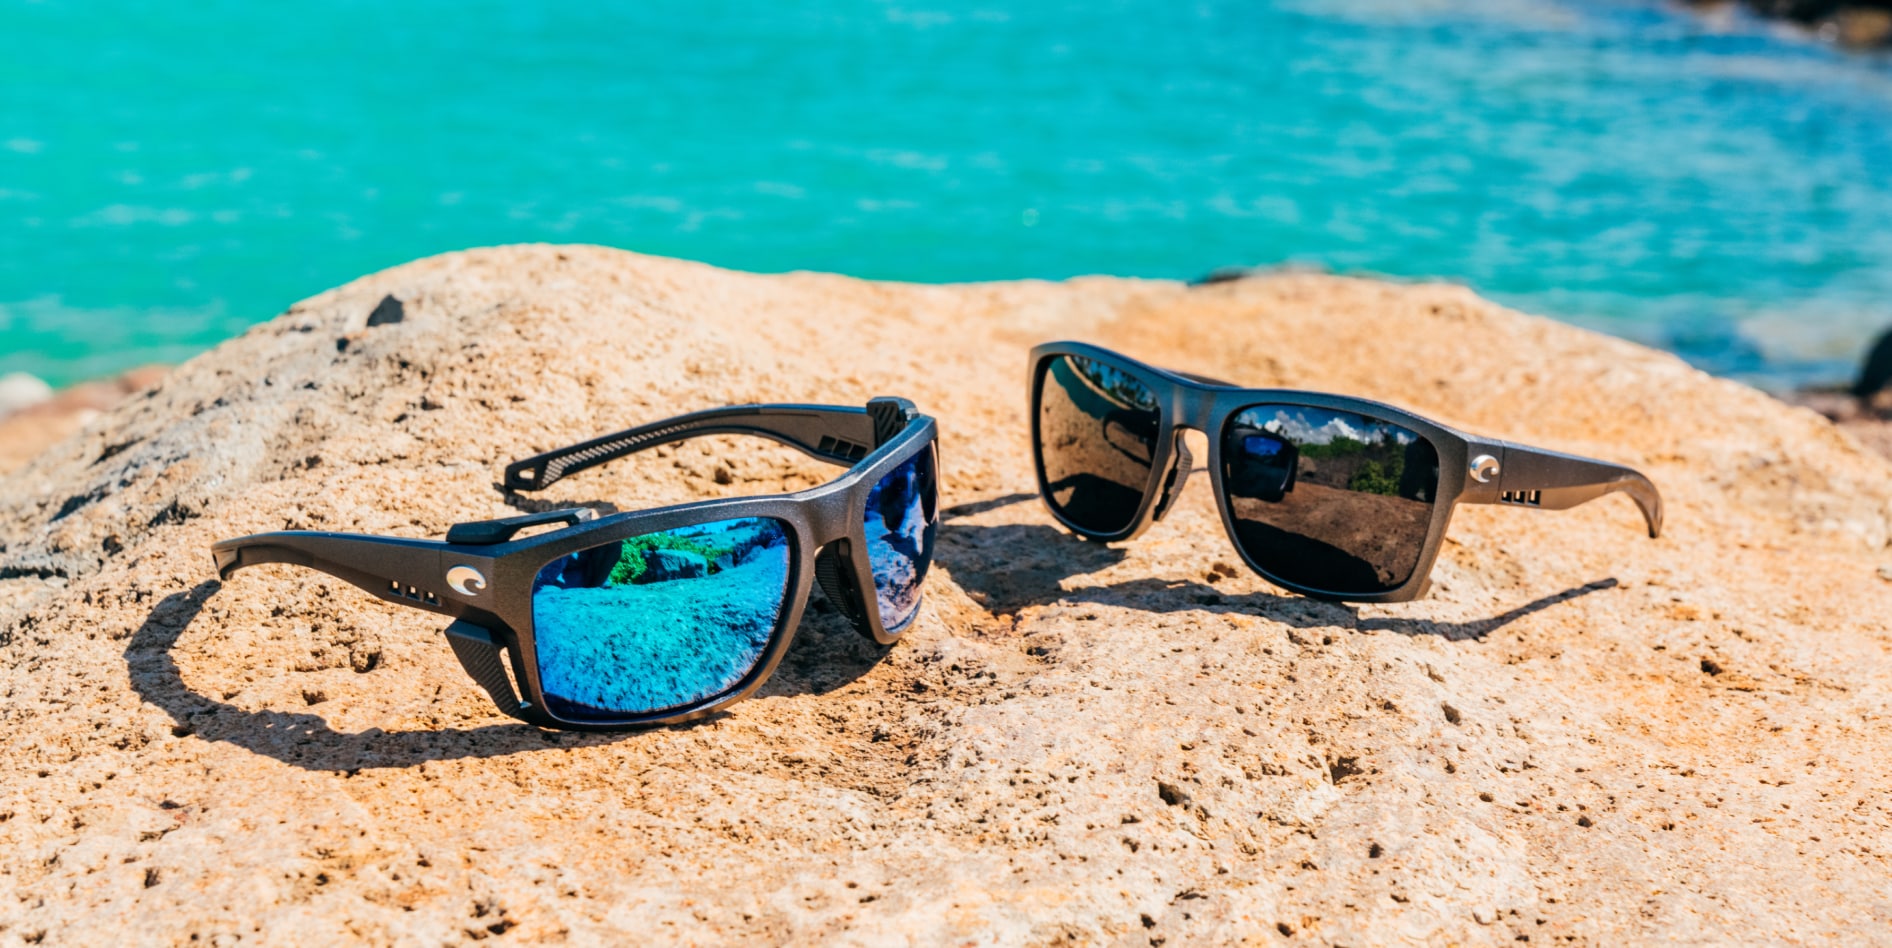 Your next voyage is just past the horizon.  Sunglasses, Costa sunglasses,  Mirrored sunglasses men